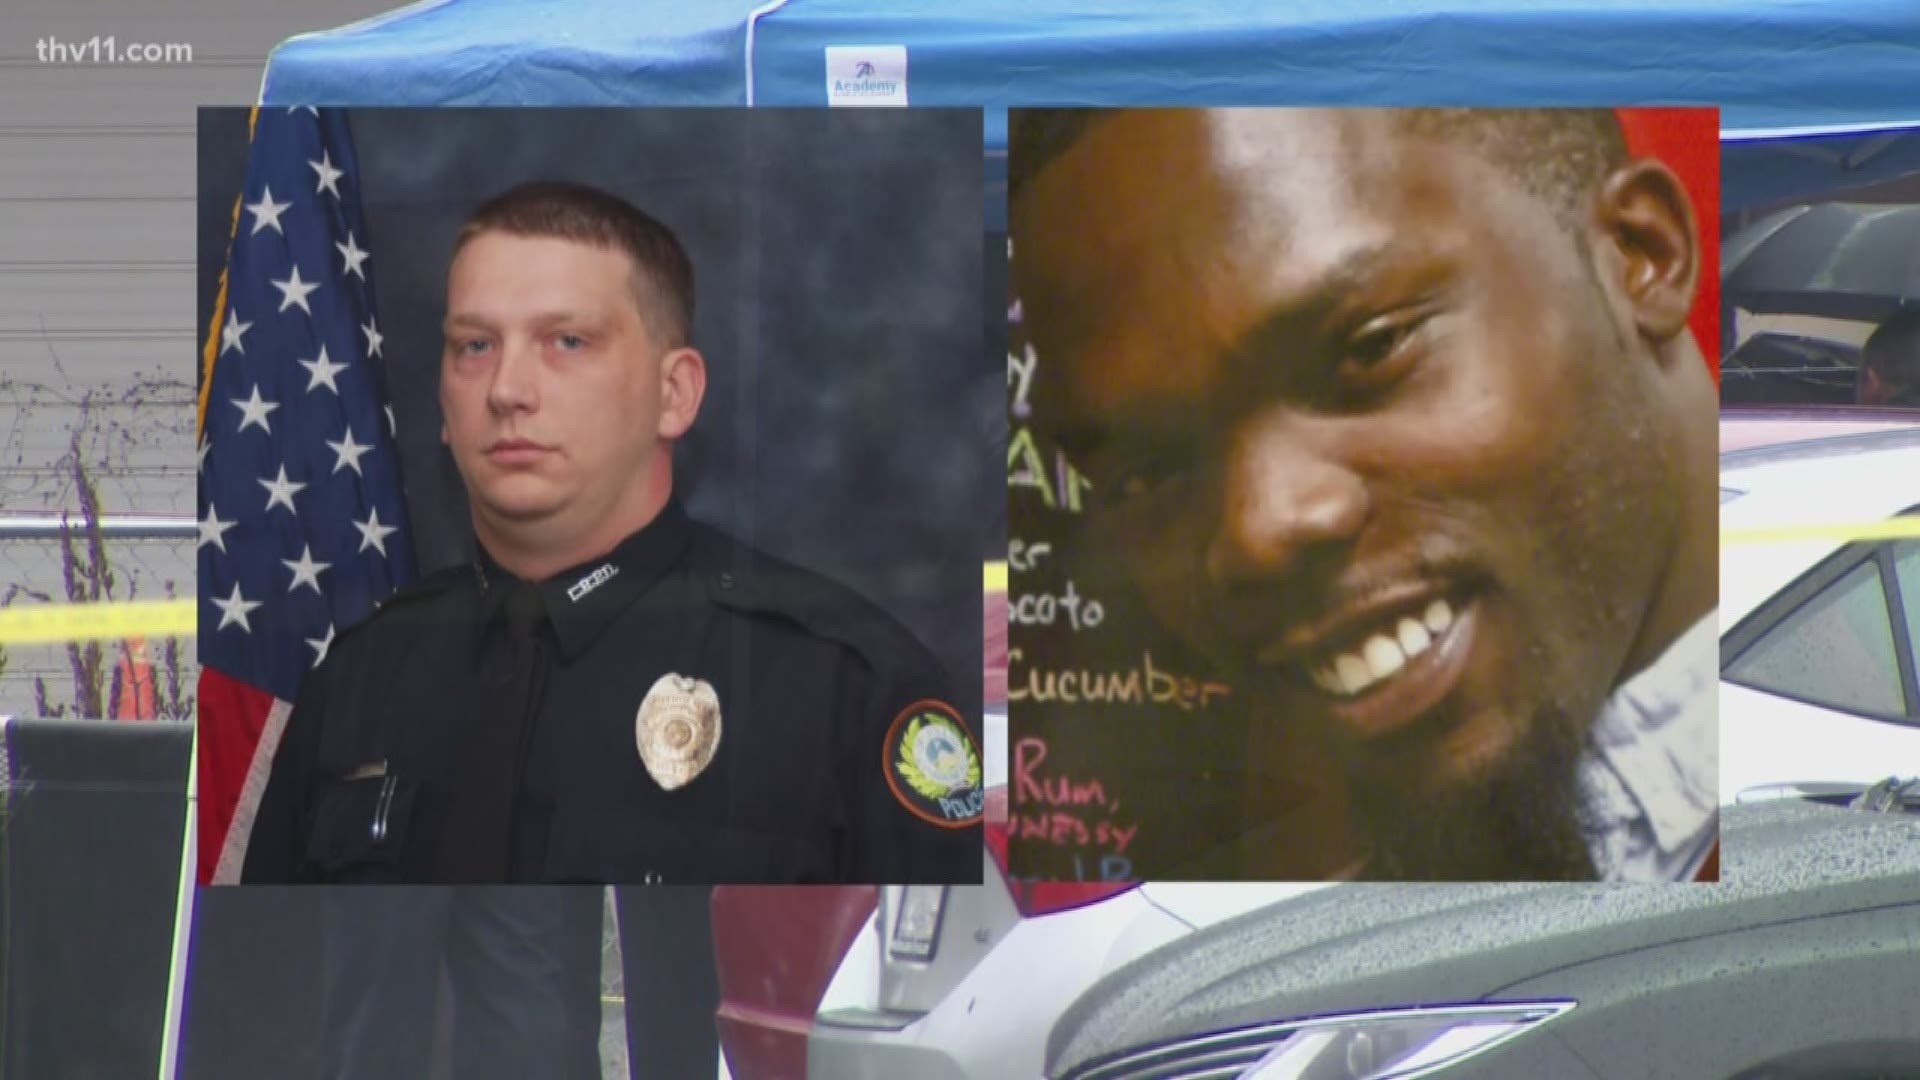 We're hearing from attorneys for Little Rock police officer Charles Starks and the family of Bradley Blackshire.